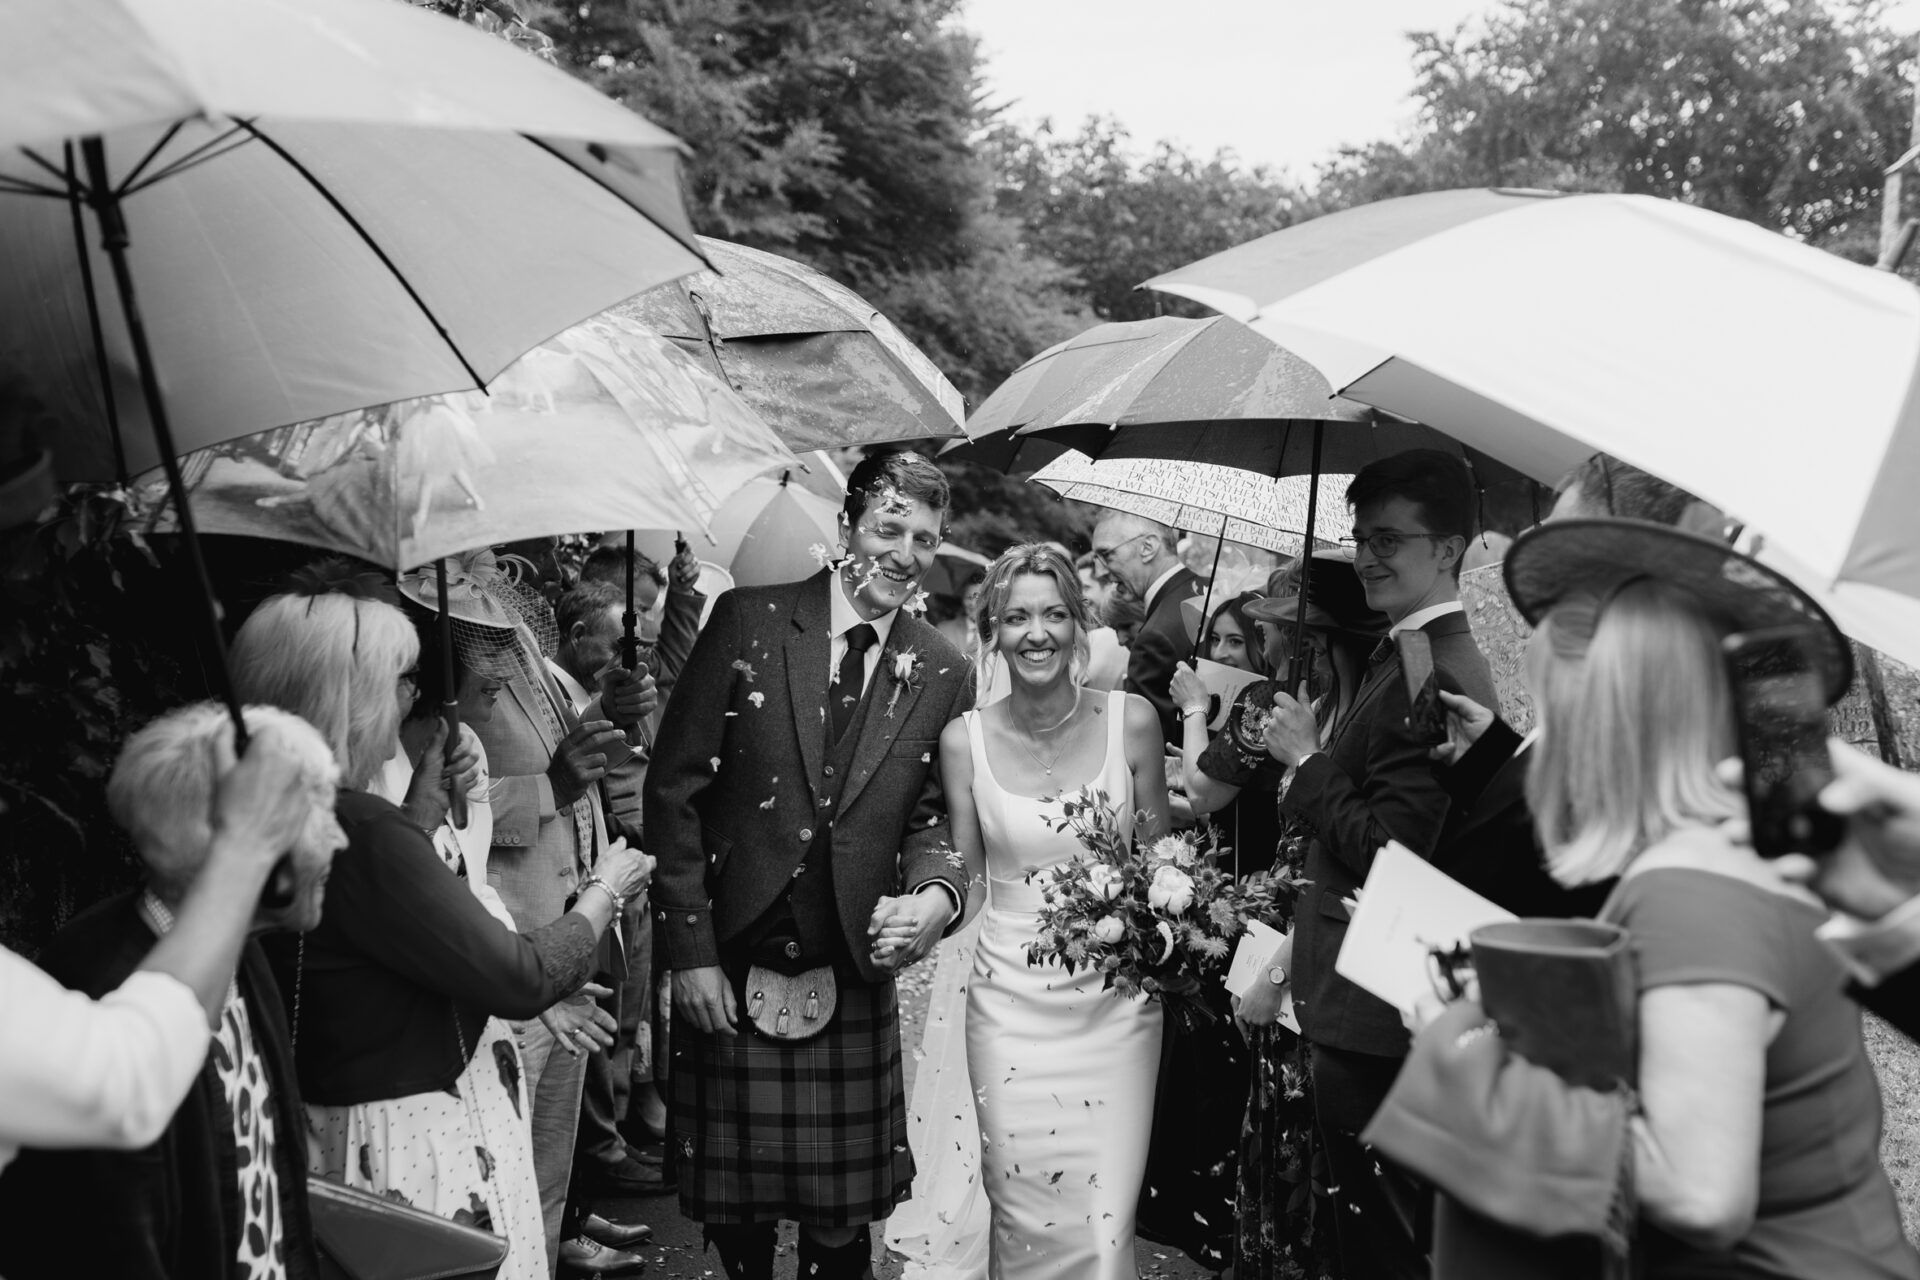 The bride and groom are greeted by a confetti tunnel in the rain